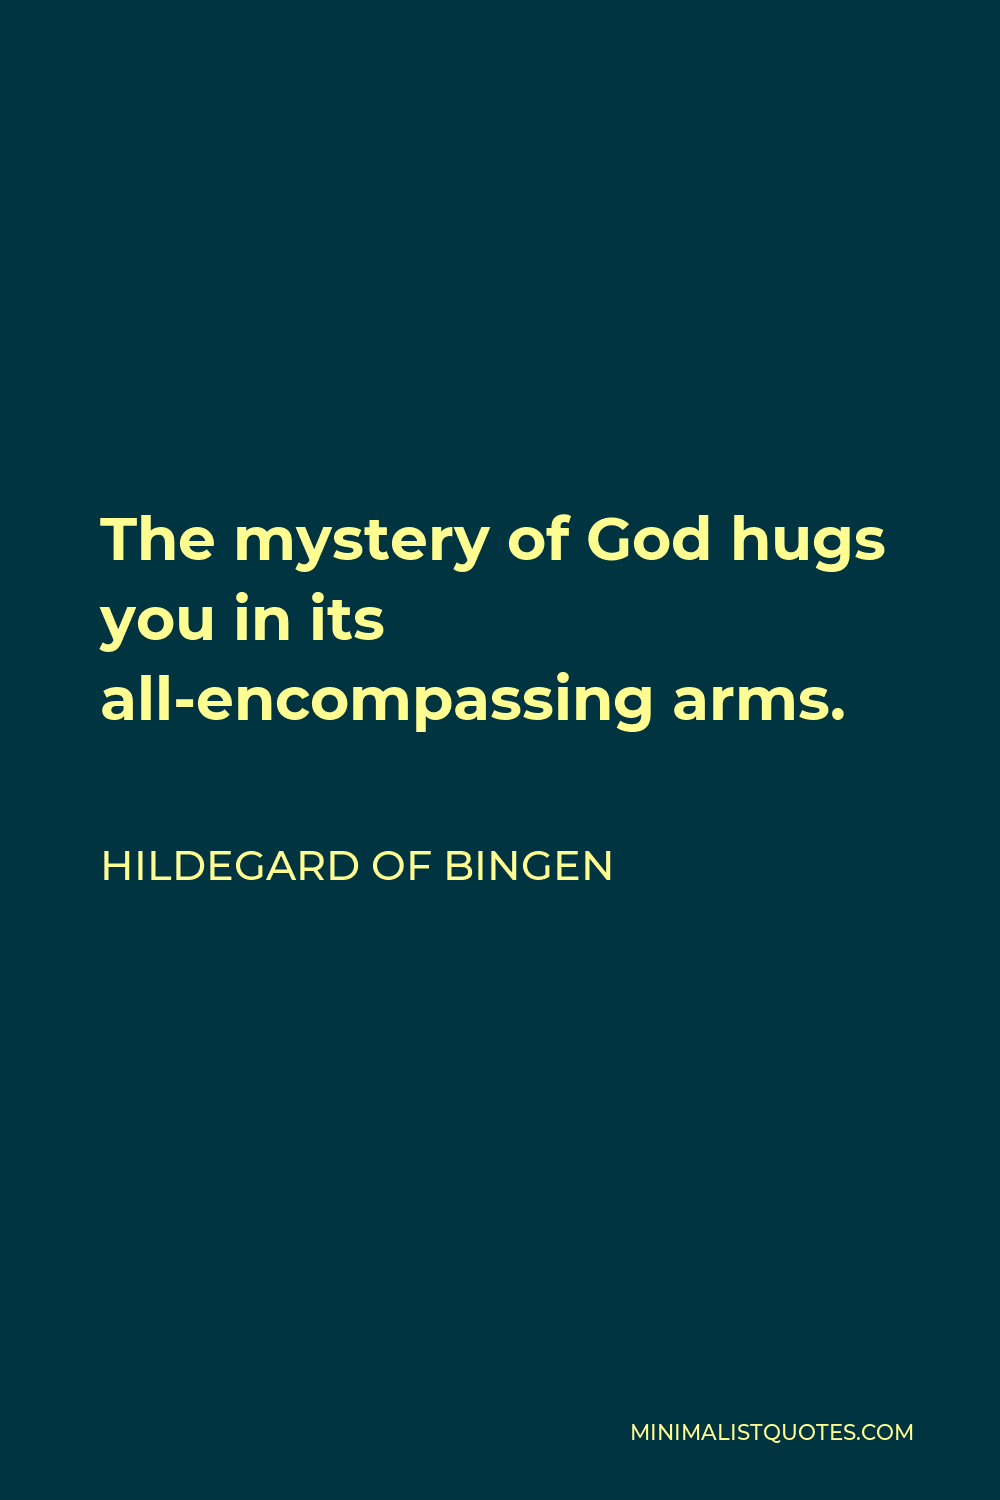 Hildegard of Bingen Quote - The mystery of God hugs you in its all-encompassing arms.